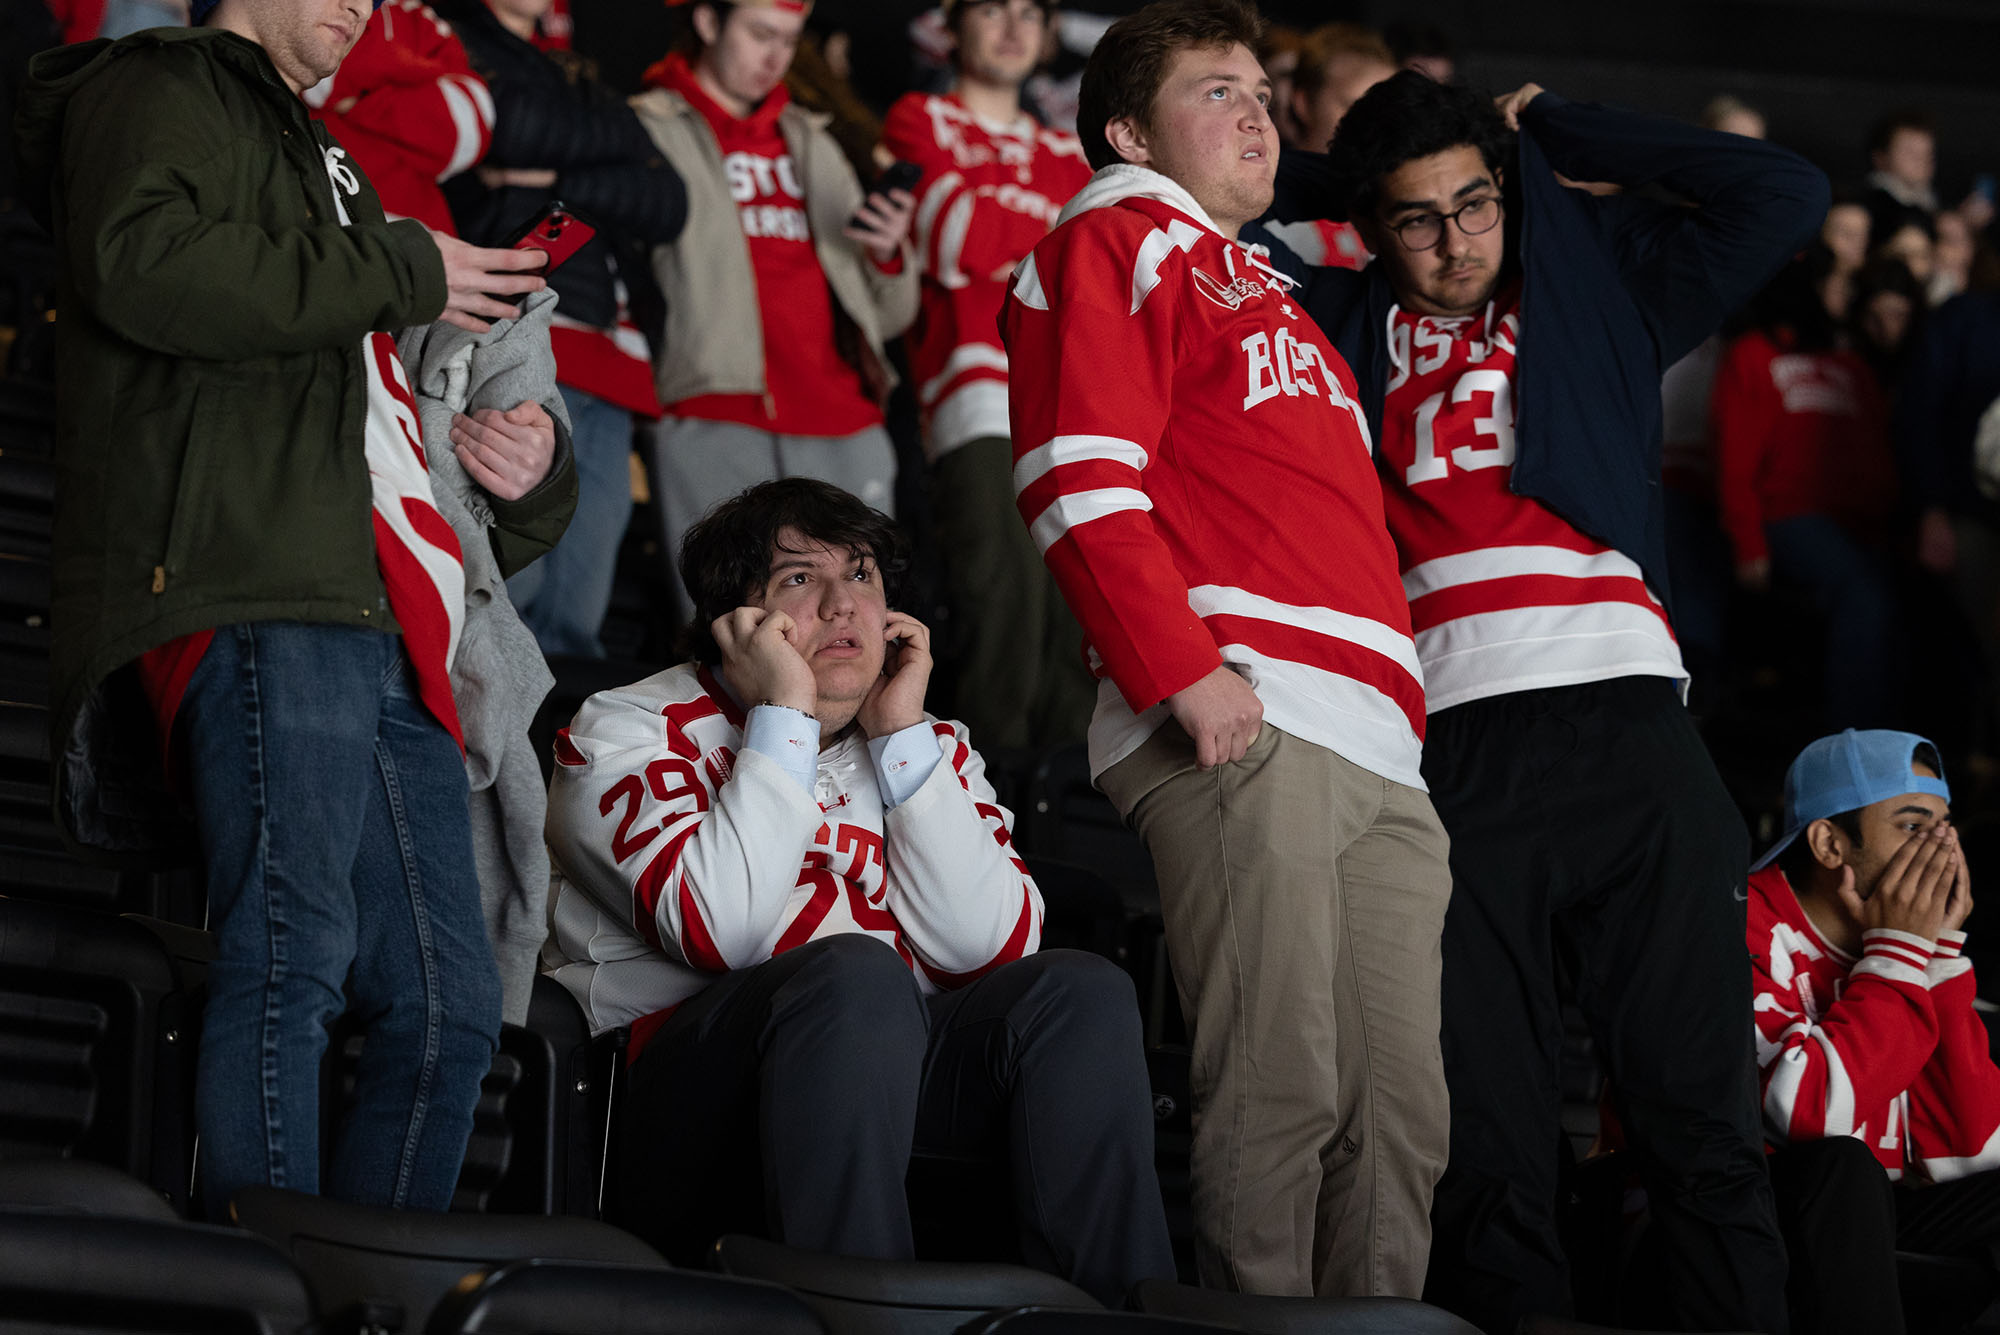 Photo: A crowd of fans for BU men's hockey hold their heads as BU team loses their lead. They wear various types of jerseys and merch.